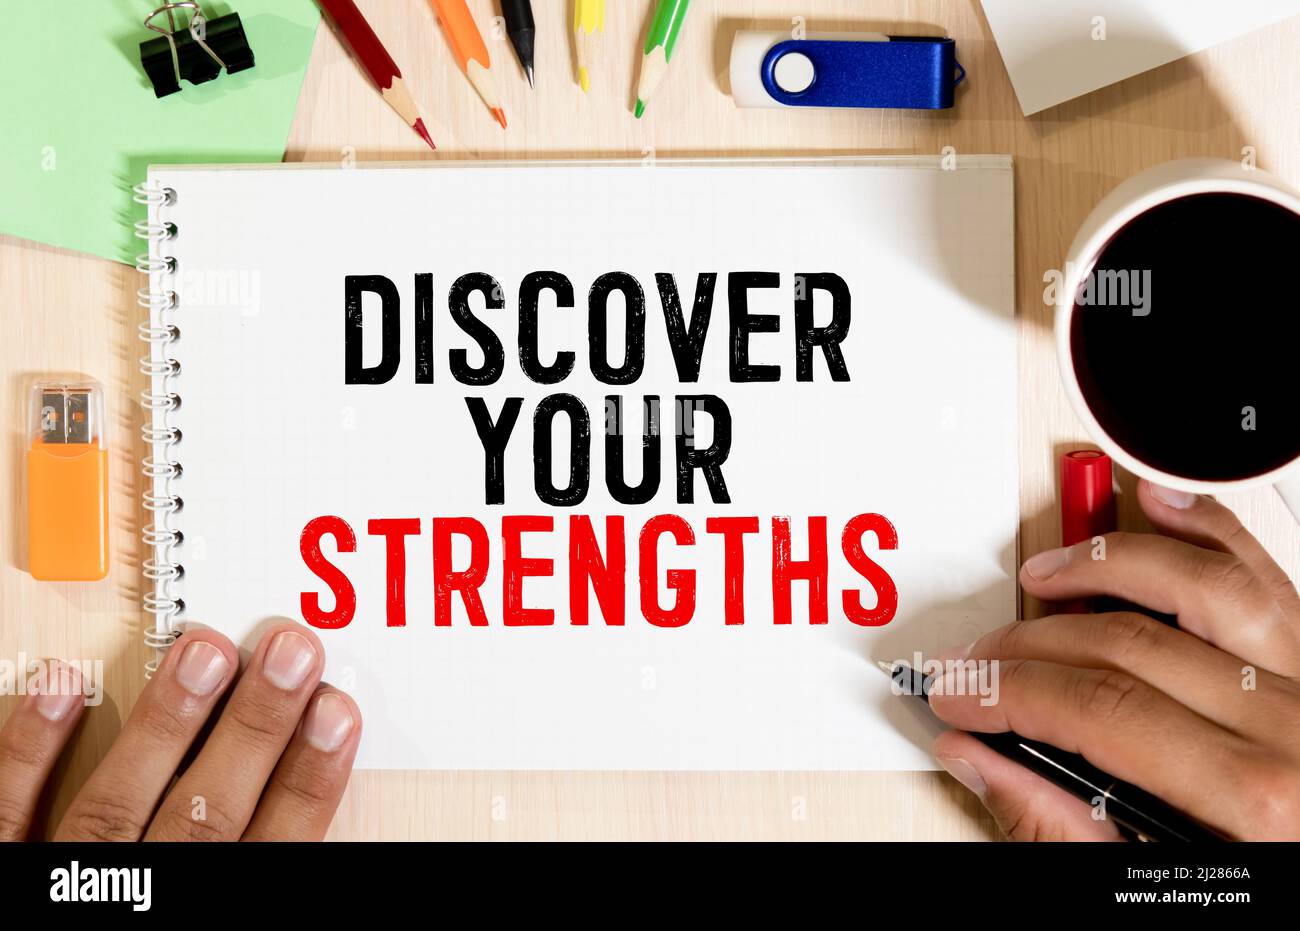 Discover your strengths- business concept of entrepreneur management message on wood background with paper clips. Stock Photo